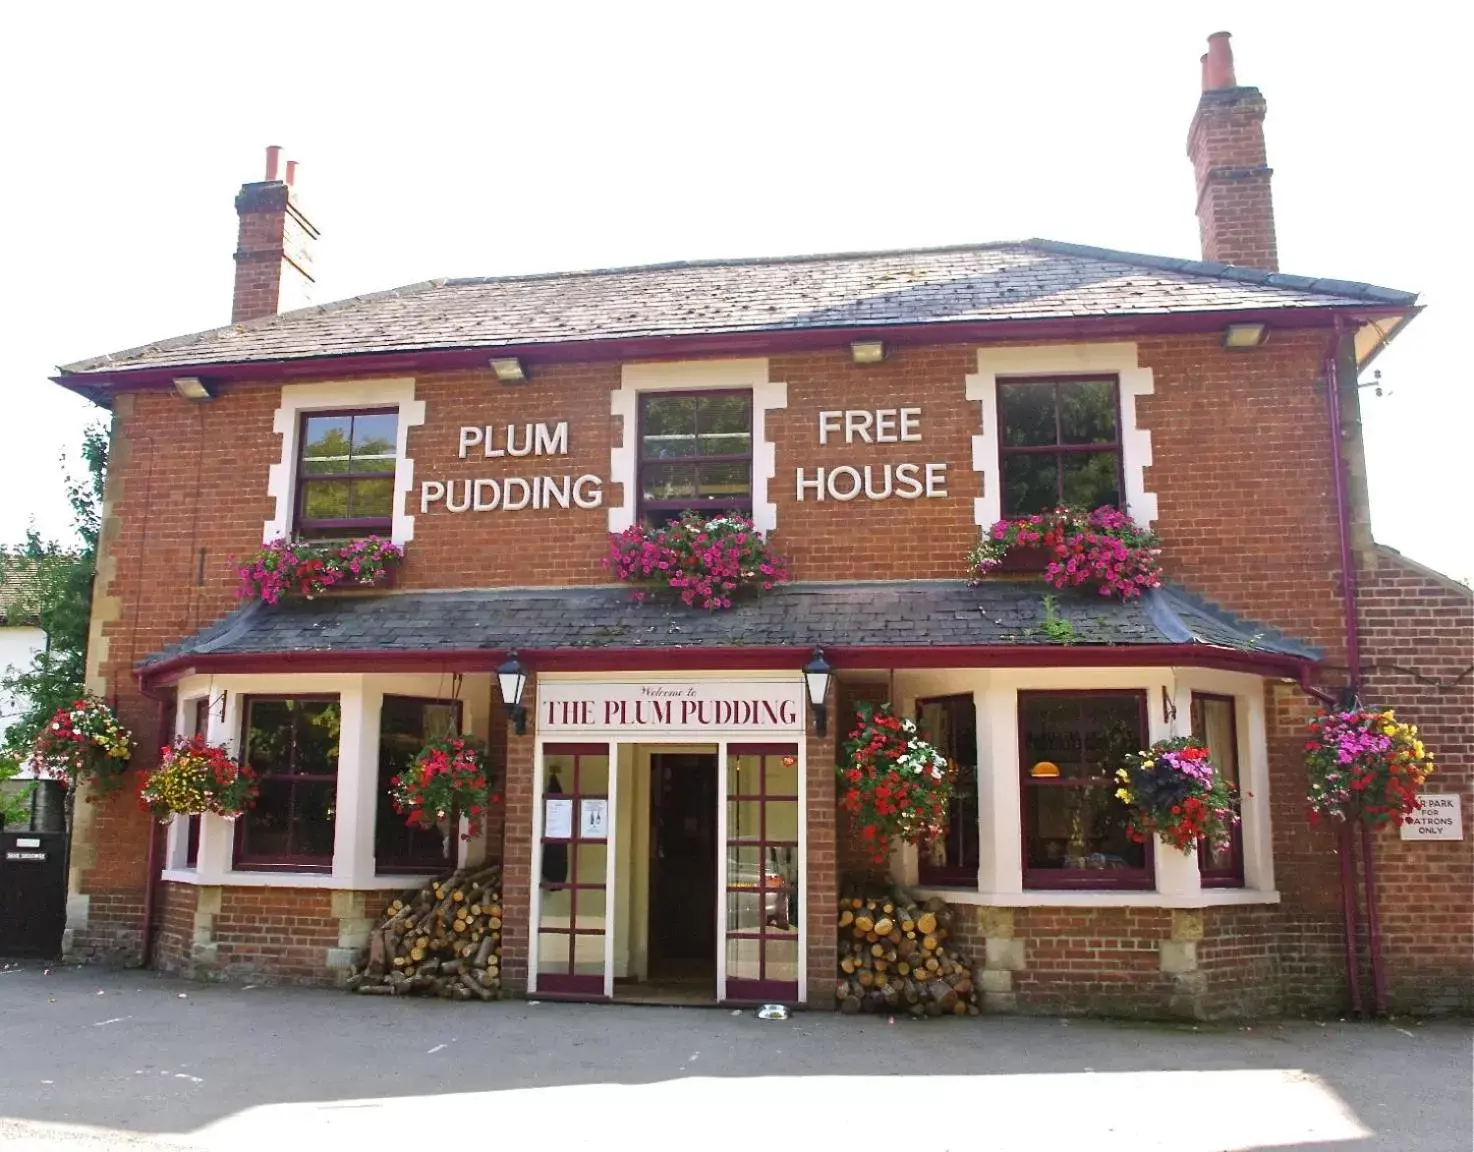 Property building in Plum Pudding